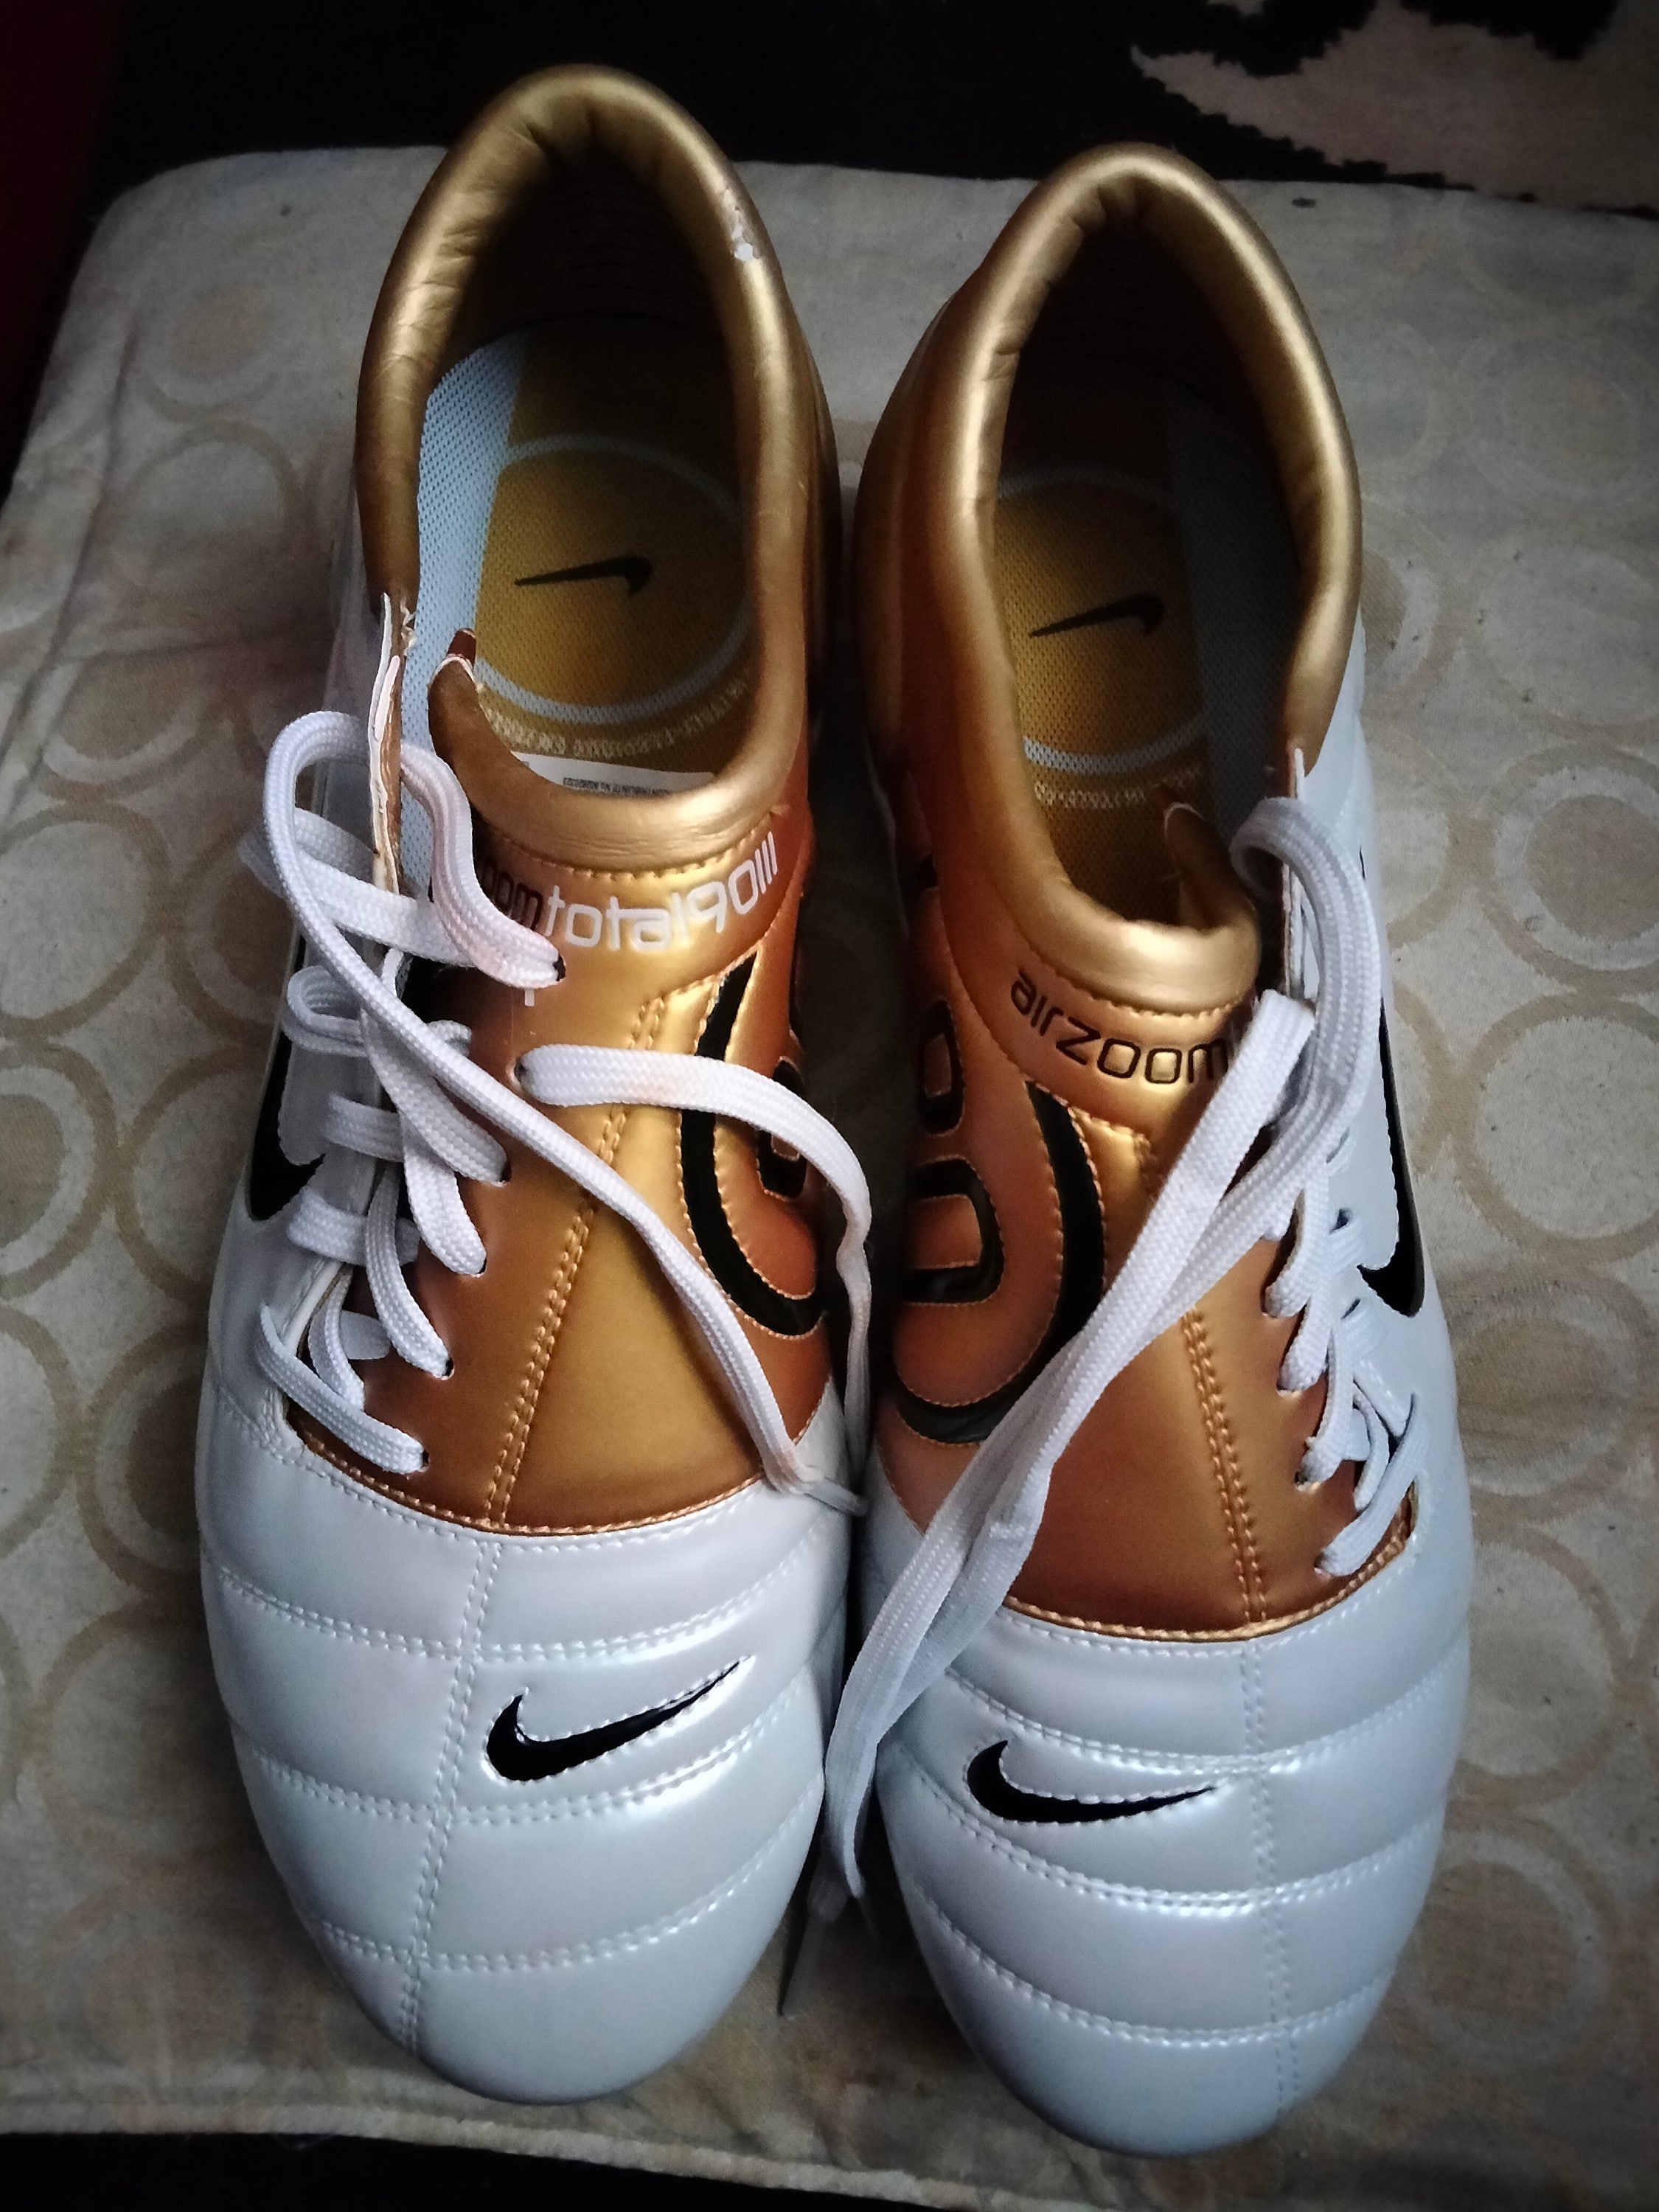 Postcode Indringing mosterd Nike Air Zoom Total 90 Iii Football Boots Made in Italy 9s Uk - Etsy